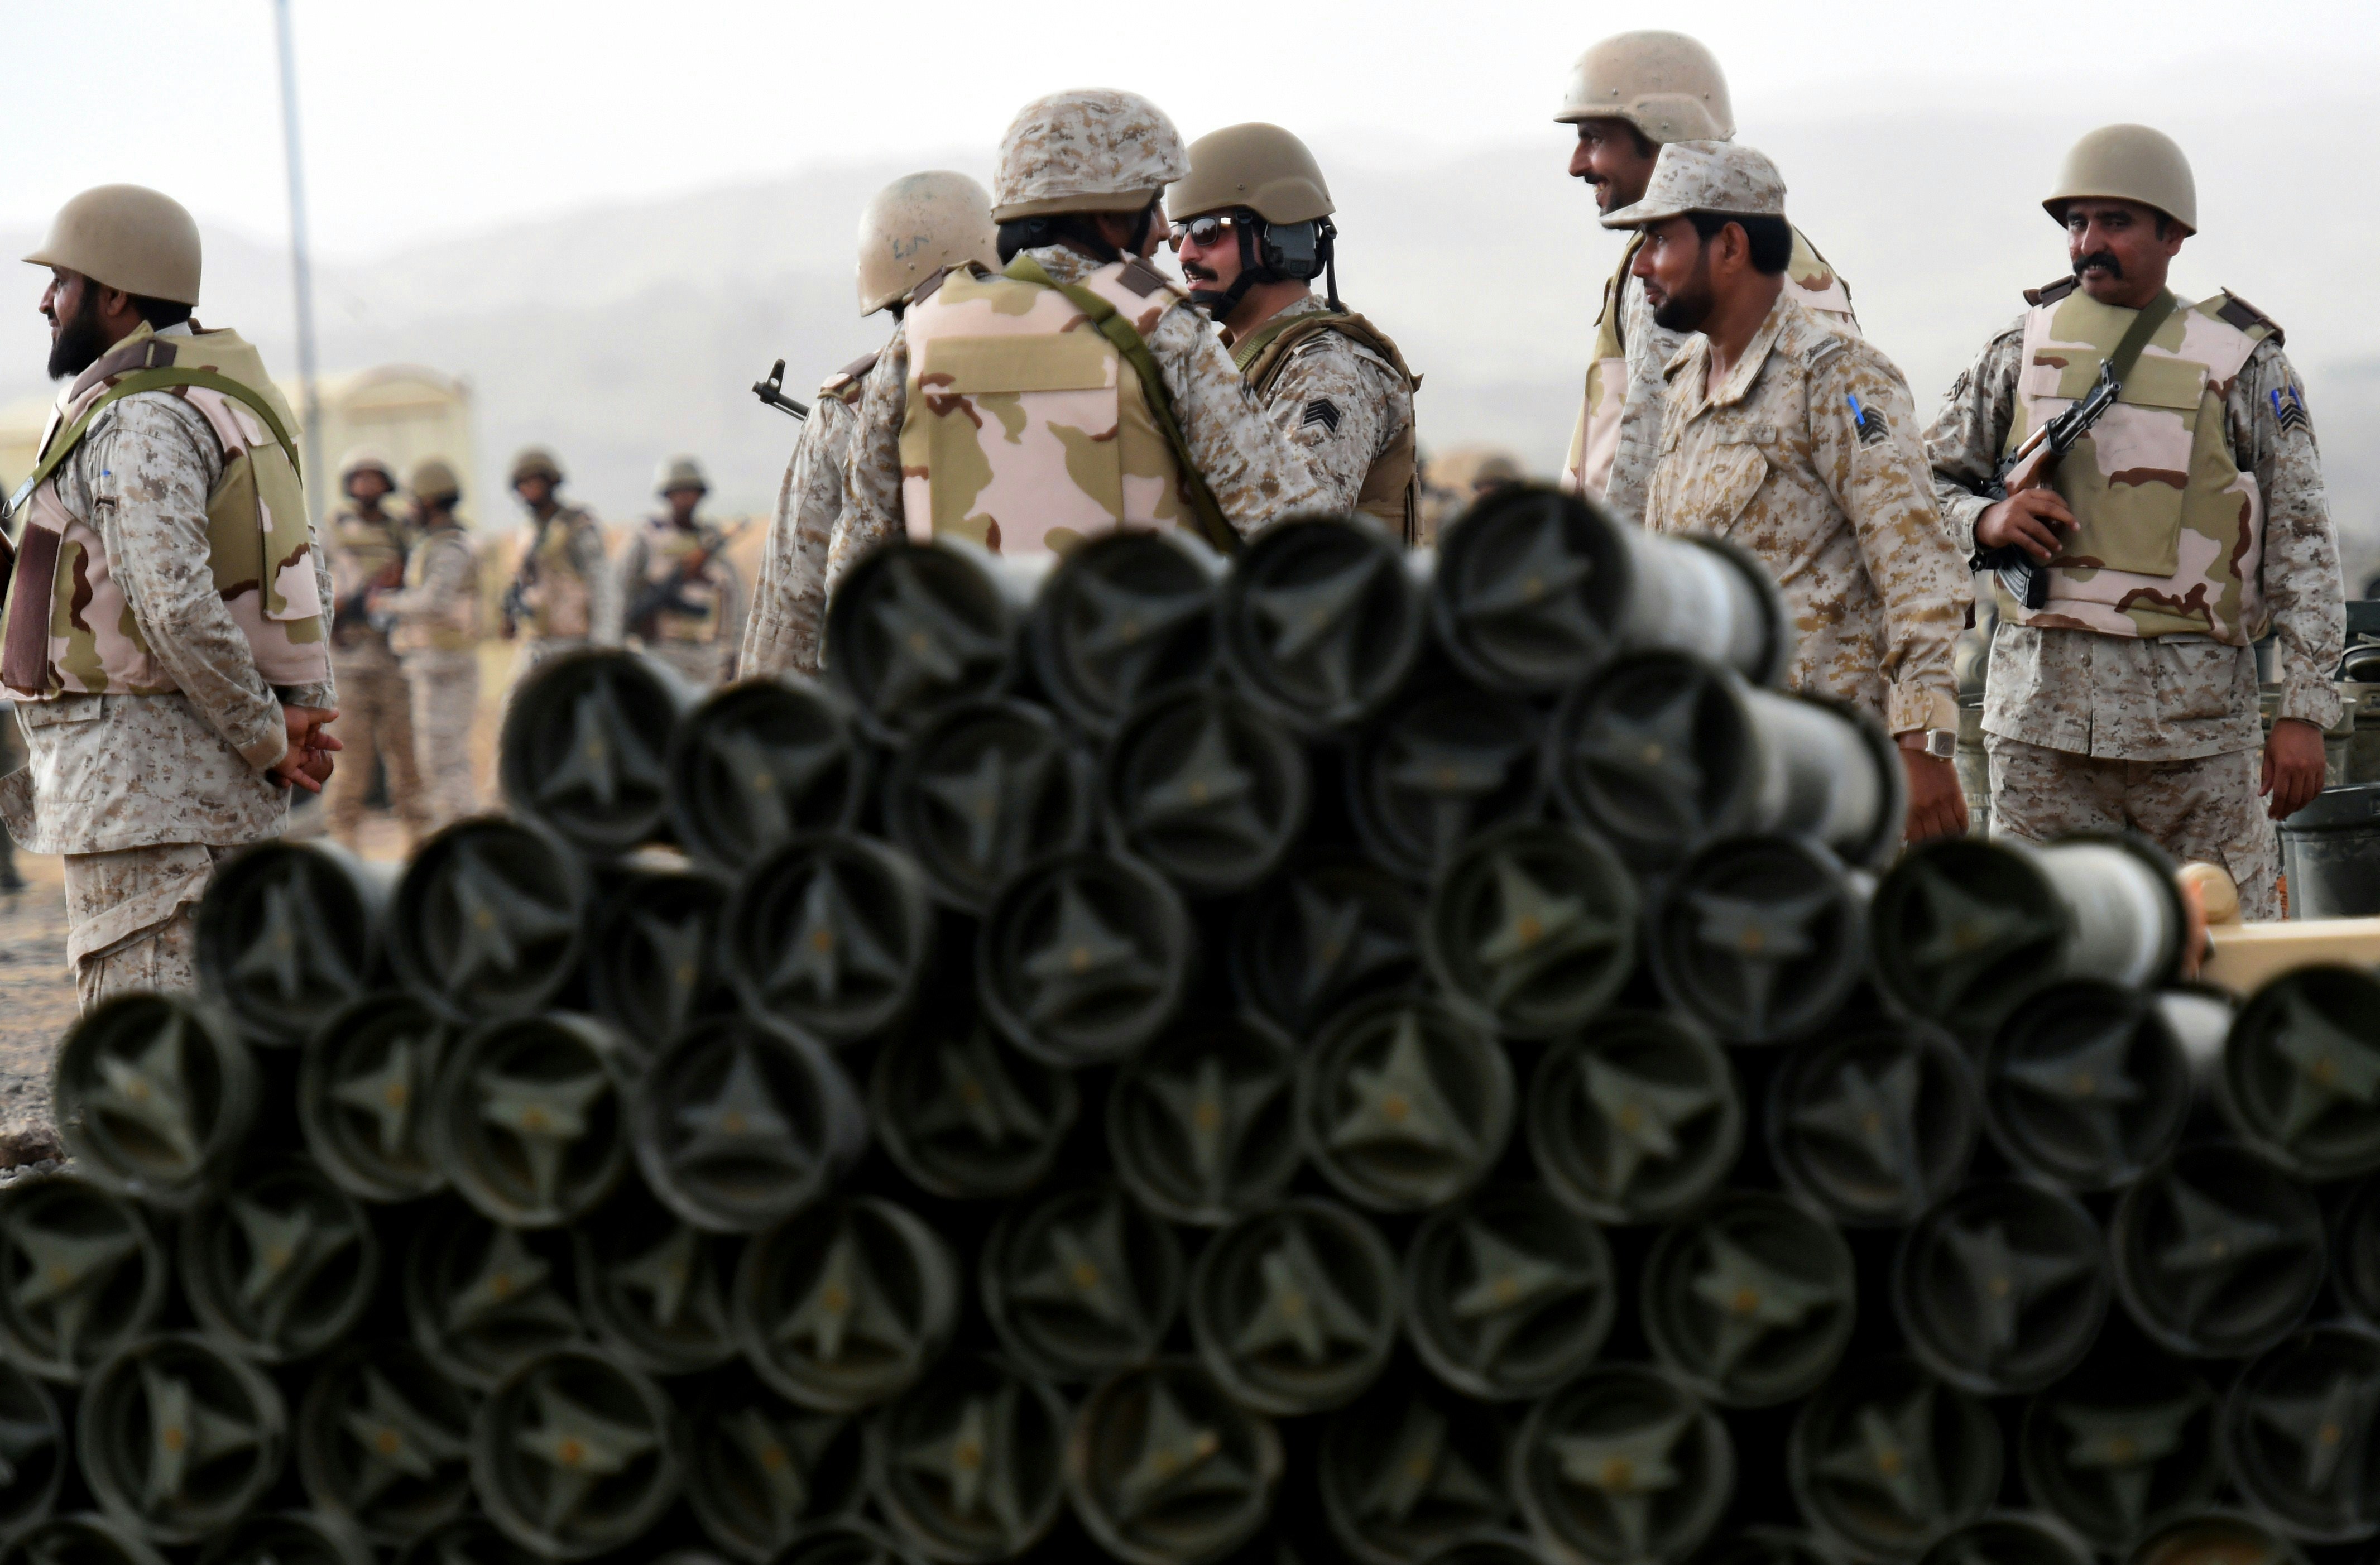 Saudi soldiers from an artillery unit stand behind a pile of ammunition at a position close to the Saudi-Yemeni border, in southwestern Saudi Arabia, on April 13, 2015. Saudi Arabia is leading a coalition of several Arab countries which since March 26 has carried out air strikes against the Shiite Huthis rebels, who overran the capital Sanaa in September and have expanded to other parts of Yemen. AFP PHOTO / FAYEZ NURELDINE        (Photo credit should read FAYEZ NURELDINE/AFP/Getty Images)